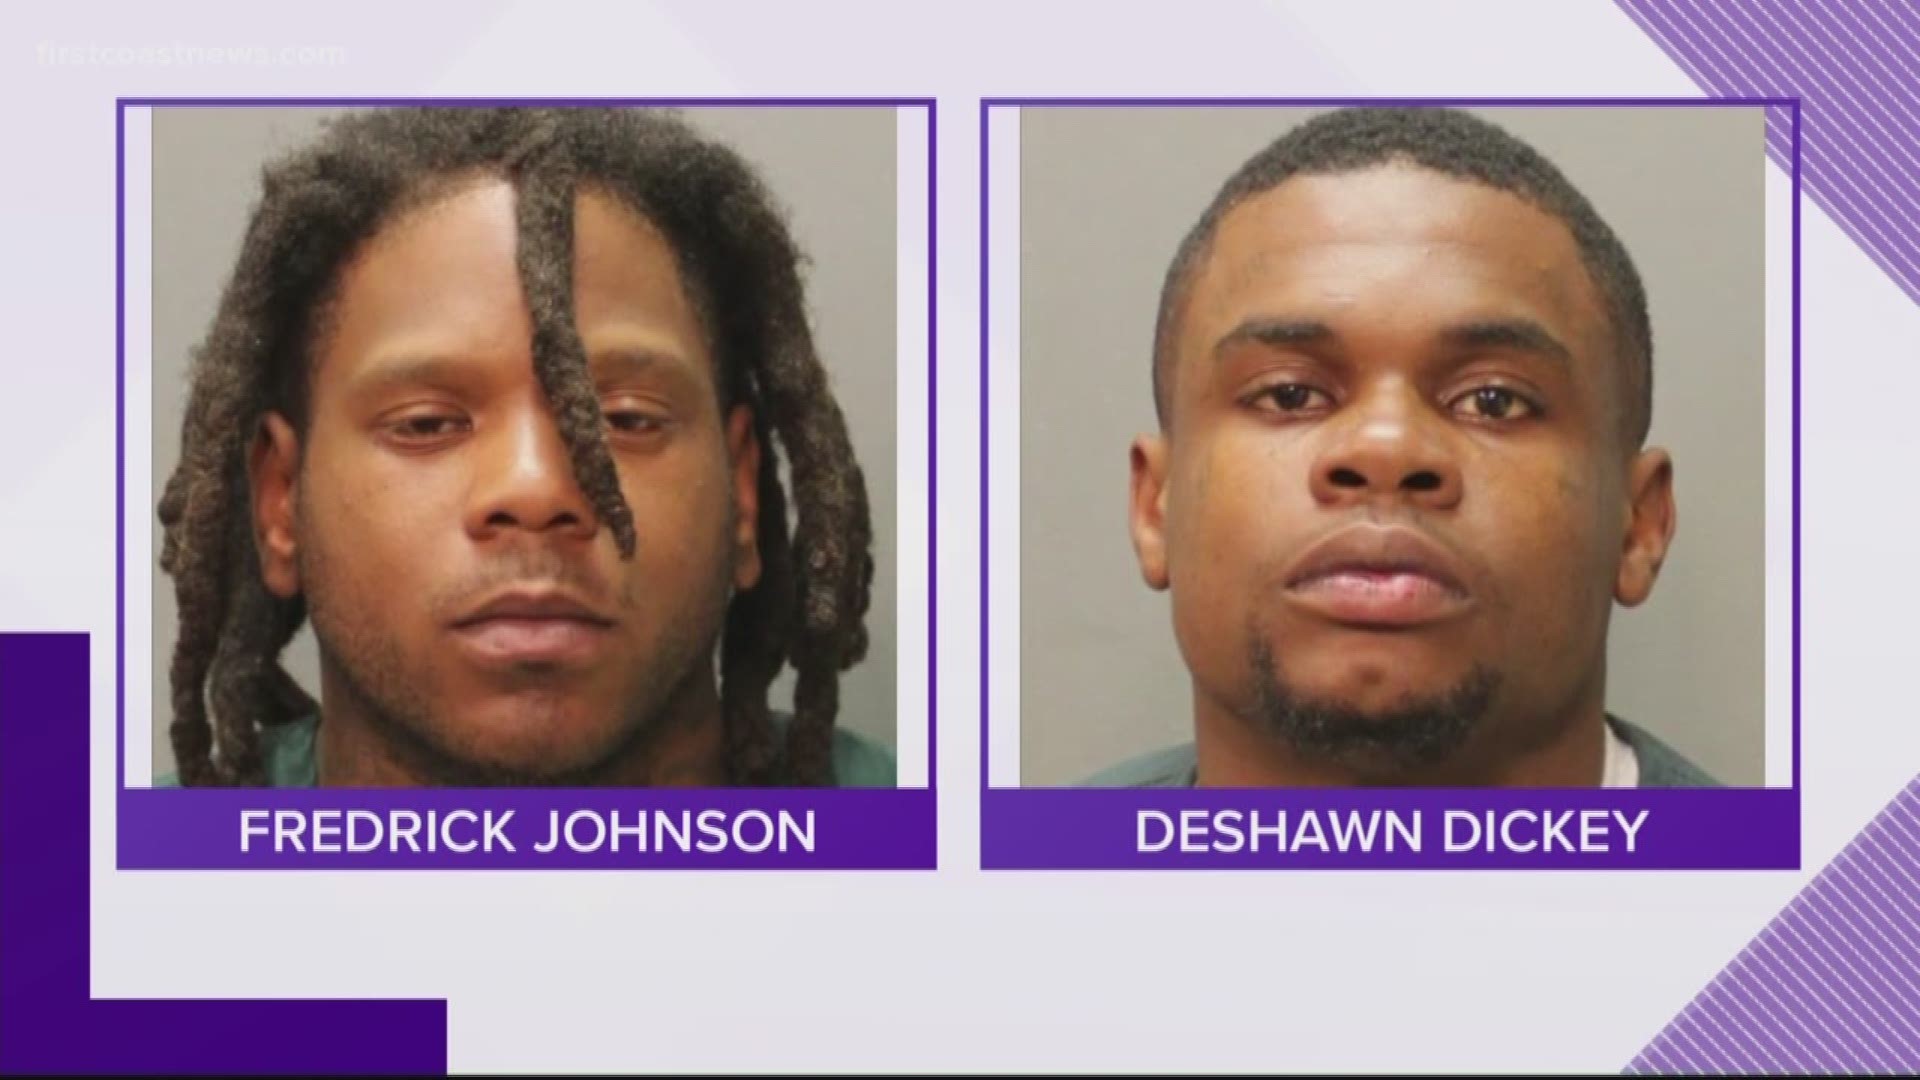 Two men were arrested in connection to a shooting involving paint balls.